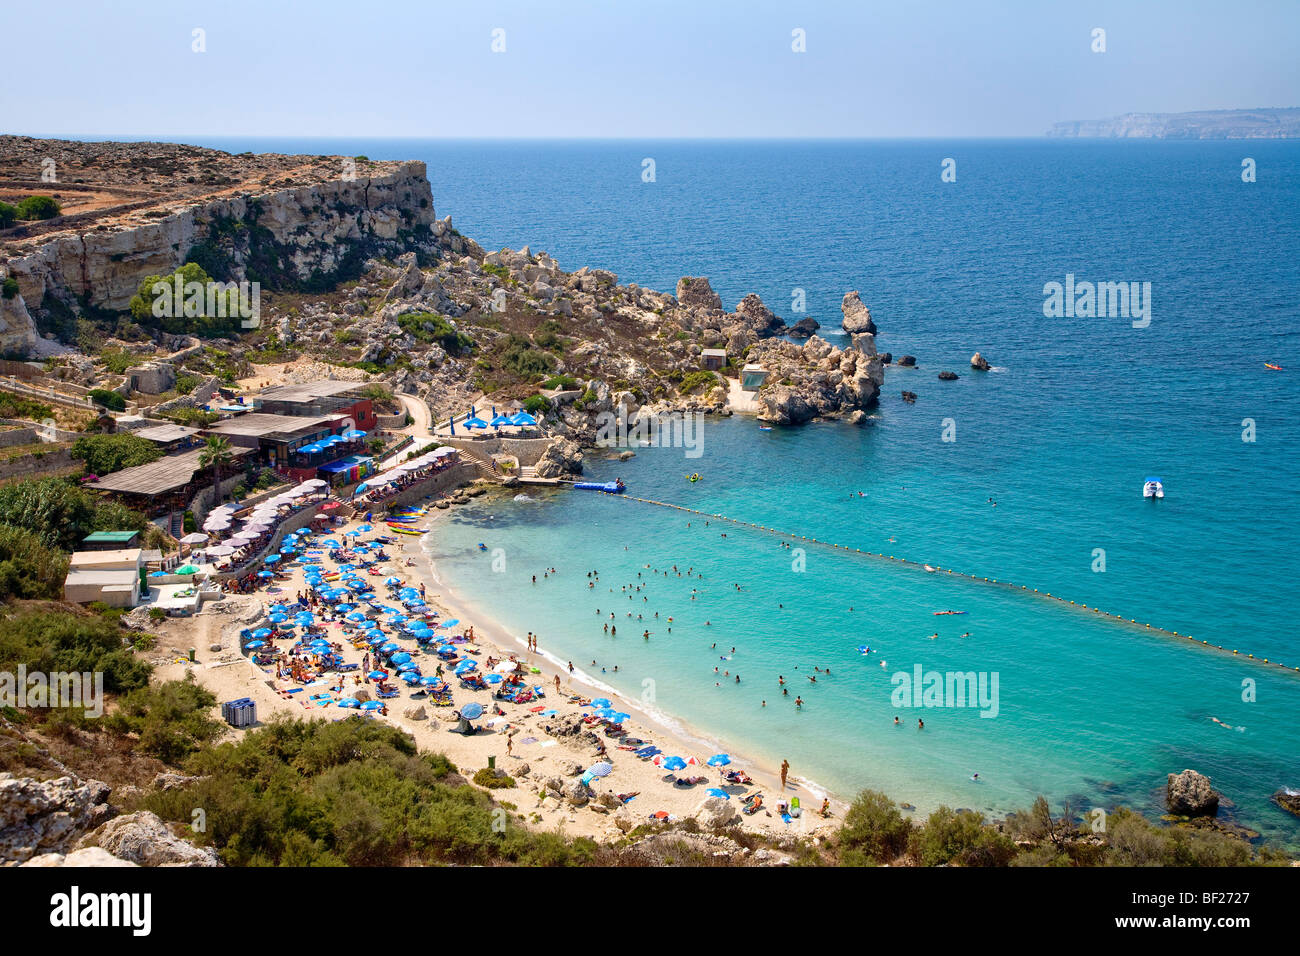 People At The Beach In A Little Bay Paradise Bay Malta Europe Stock Photo Alamy